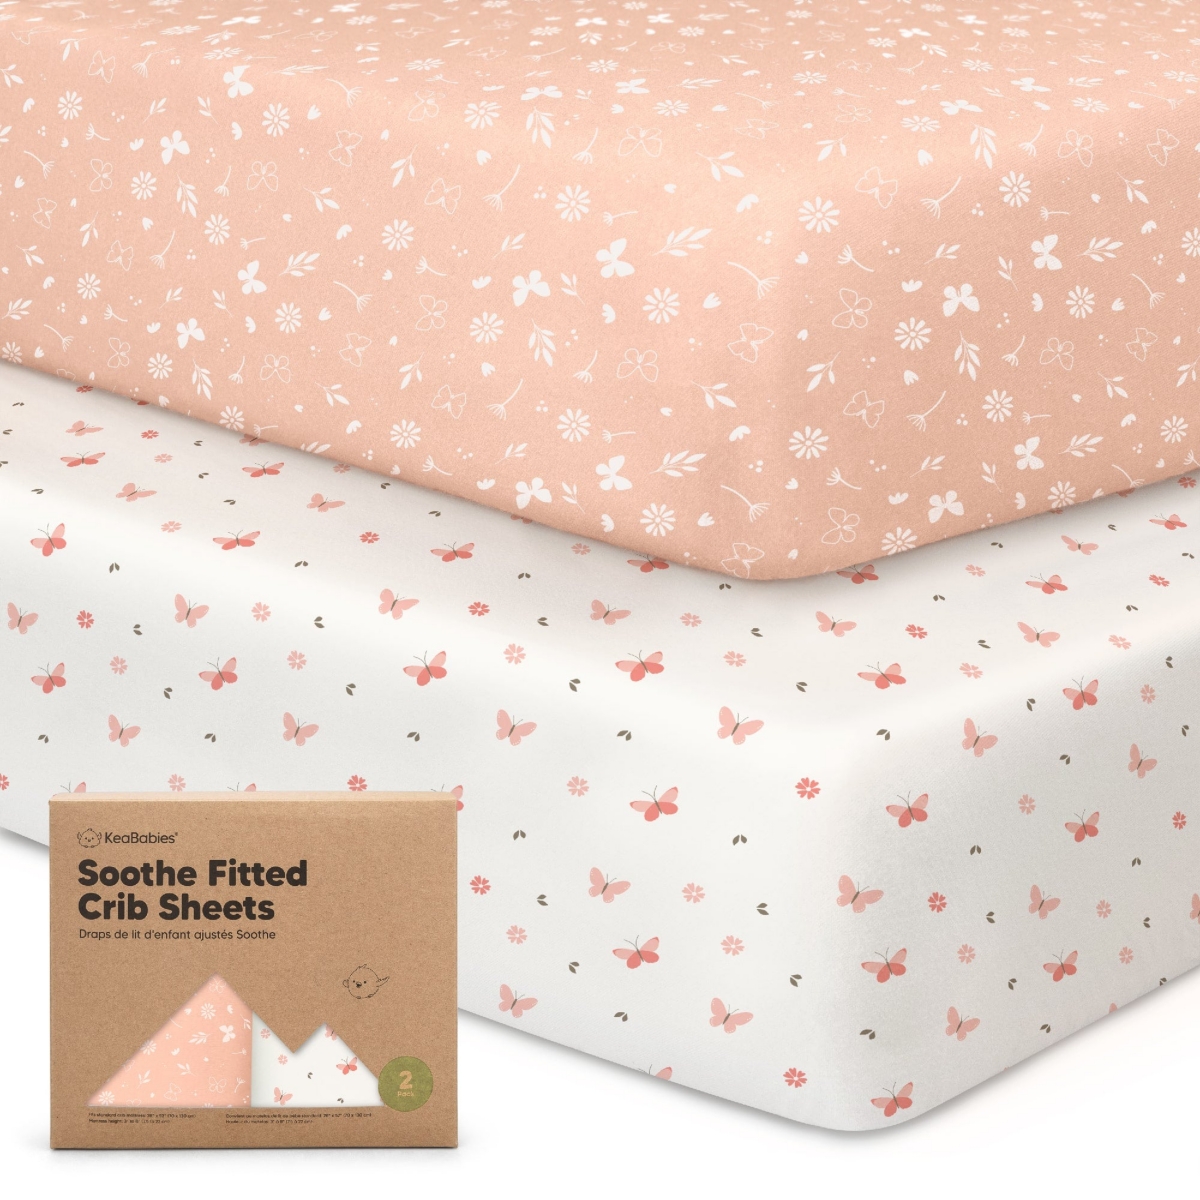 Keababies 2pk Soothe Fitted Crib Sheets Neutral, Organic Baby Crib Sheets, Fits Standard Nursery Baby Mattress In Pink